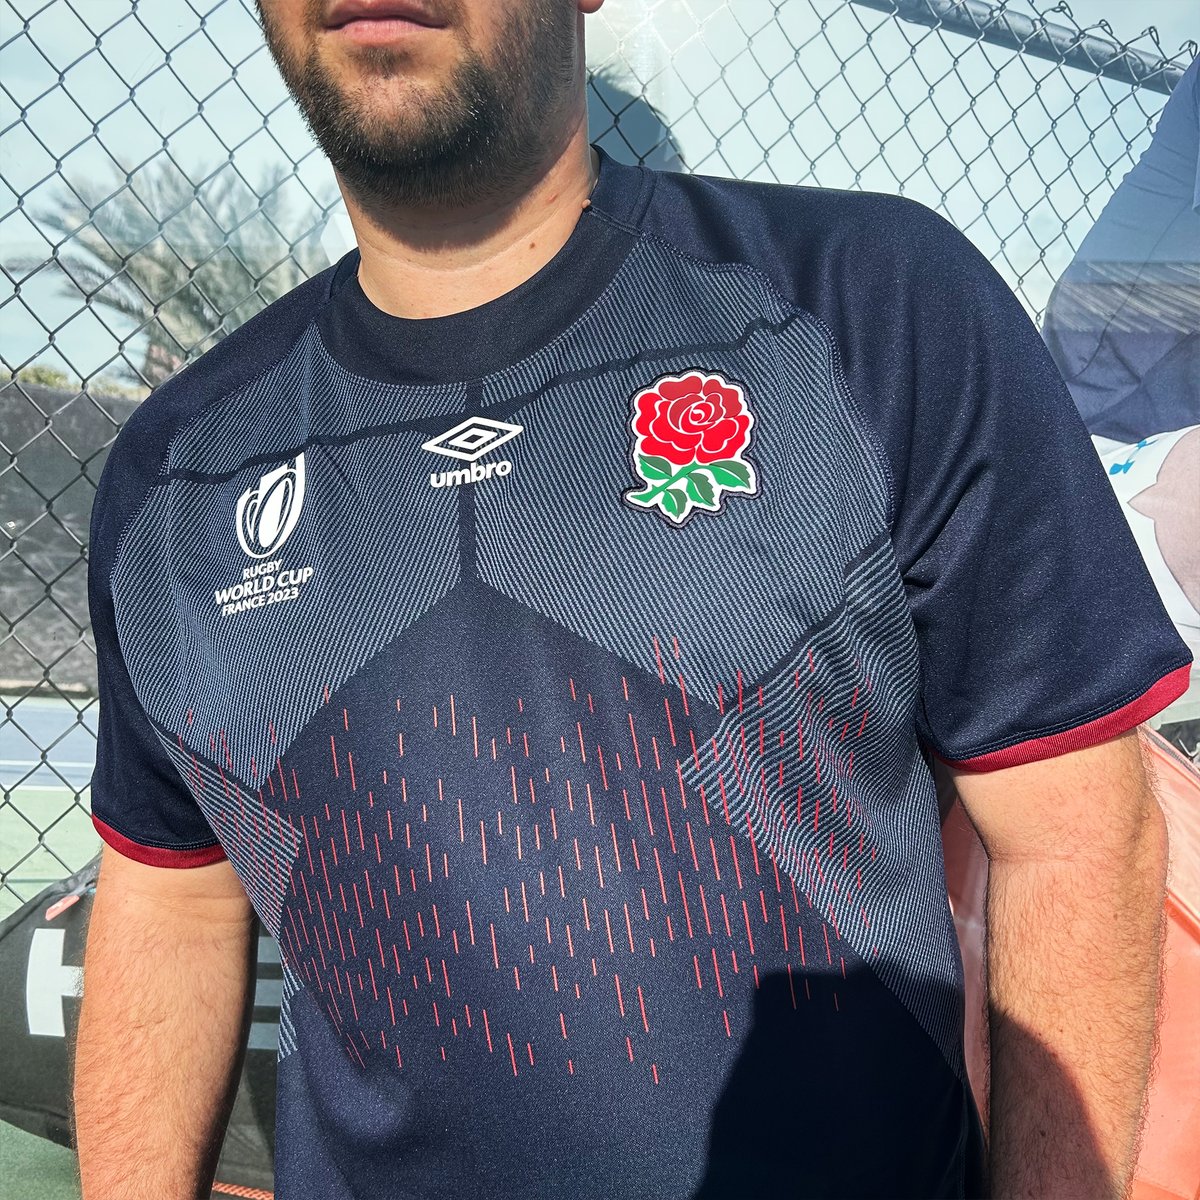 Who's got their England Rugby kit ready for Saturdays Game?

Watch England VS France on Saturday 16th March @ 8pm. 

Who's winning this time? Comment below..

#englandrugby #sixnations #sports #rugby #englandkit #englandvsfrance #shopnow #rugbylover #hawkinsport